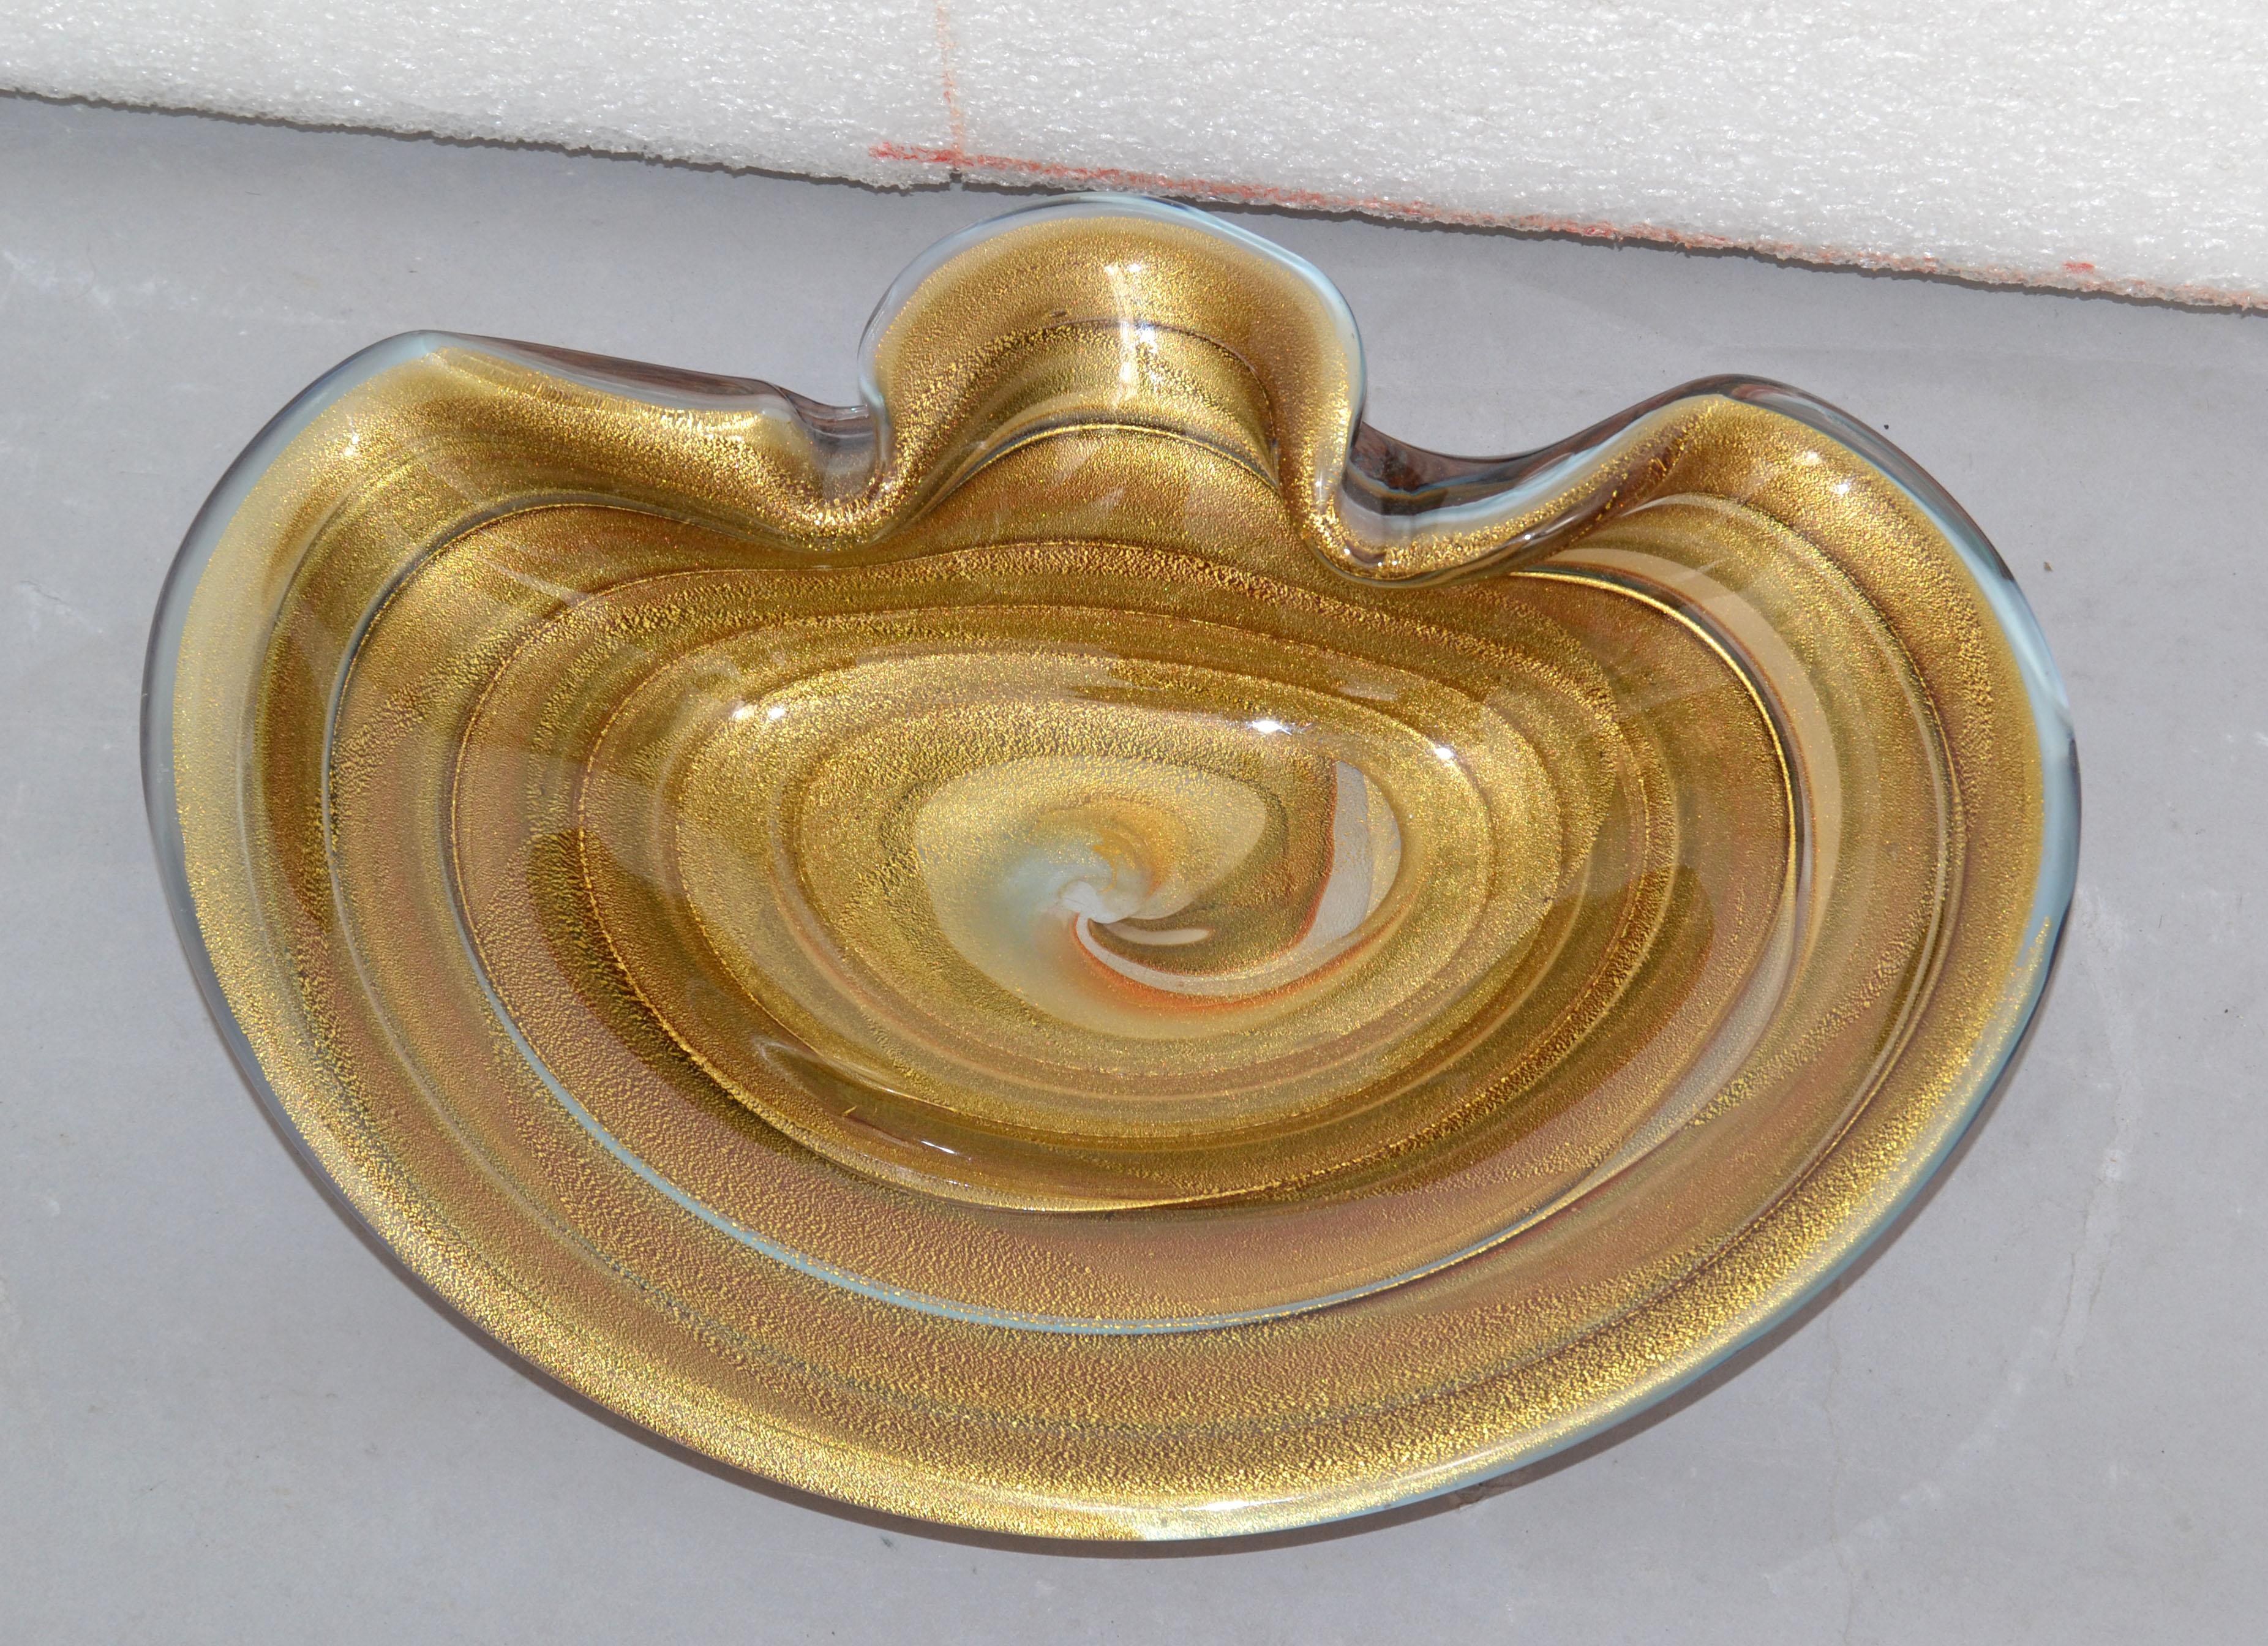 Large Finest Murano Glass Clam Shell Swirl Gold Dust Flecks Bowl, Catchall Italy In Good Condition For Sale In Miami, FL